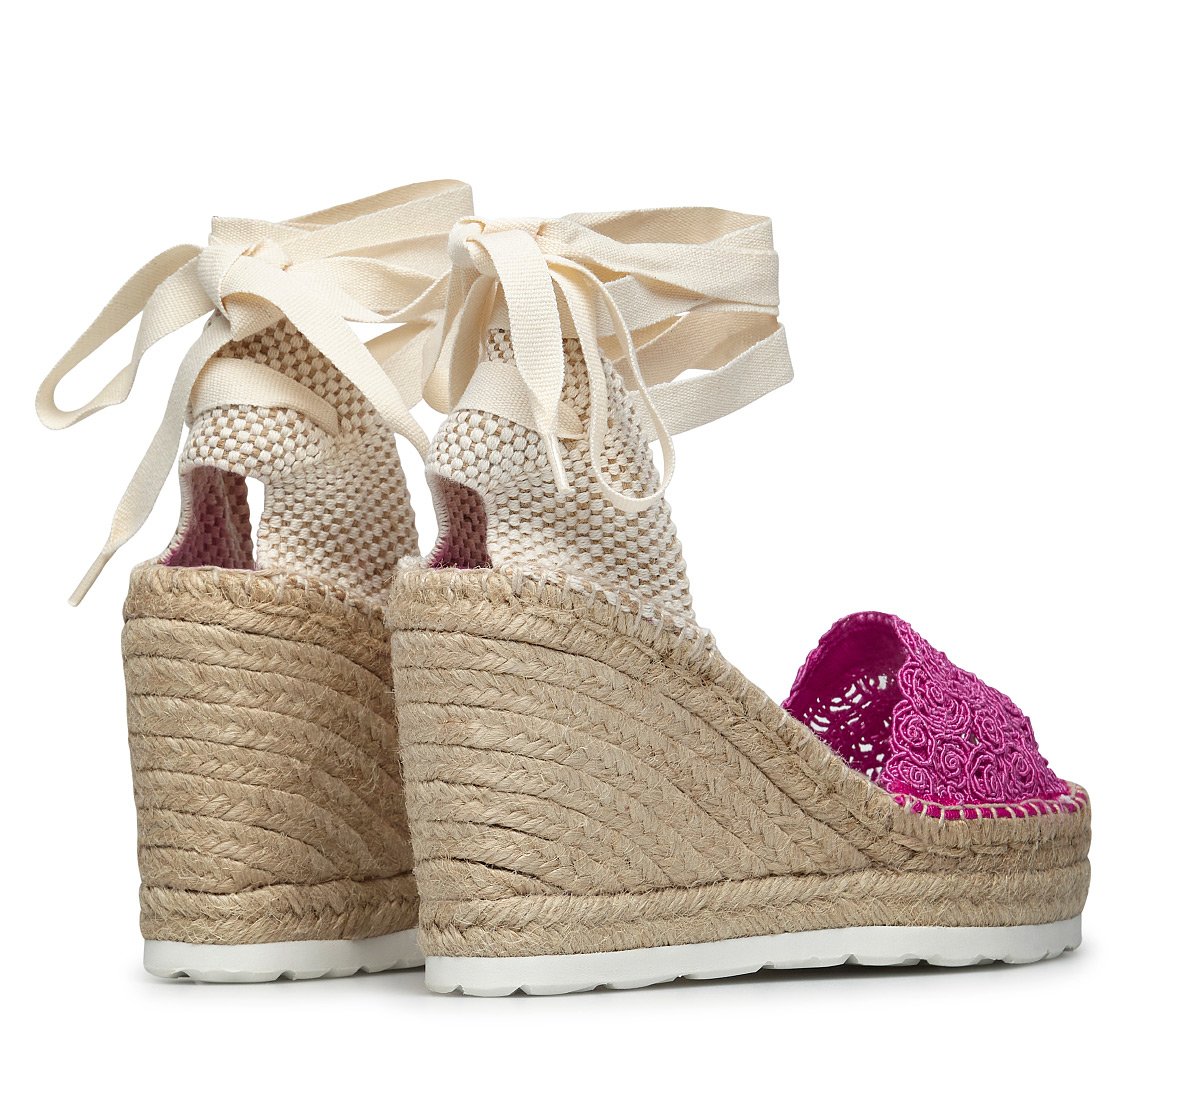 Embroidered satin wedge espadrilles